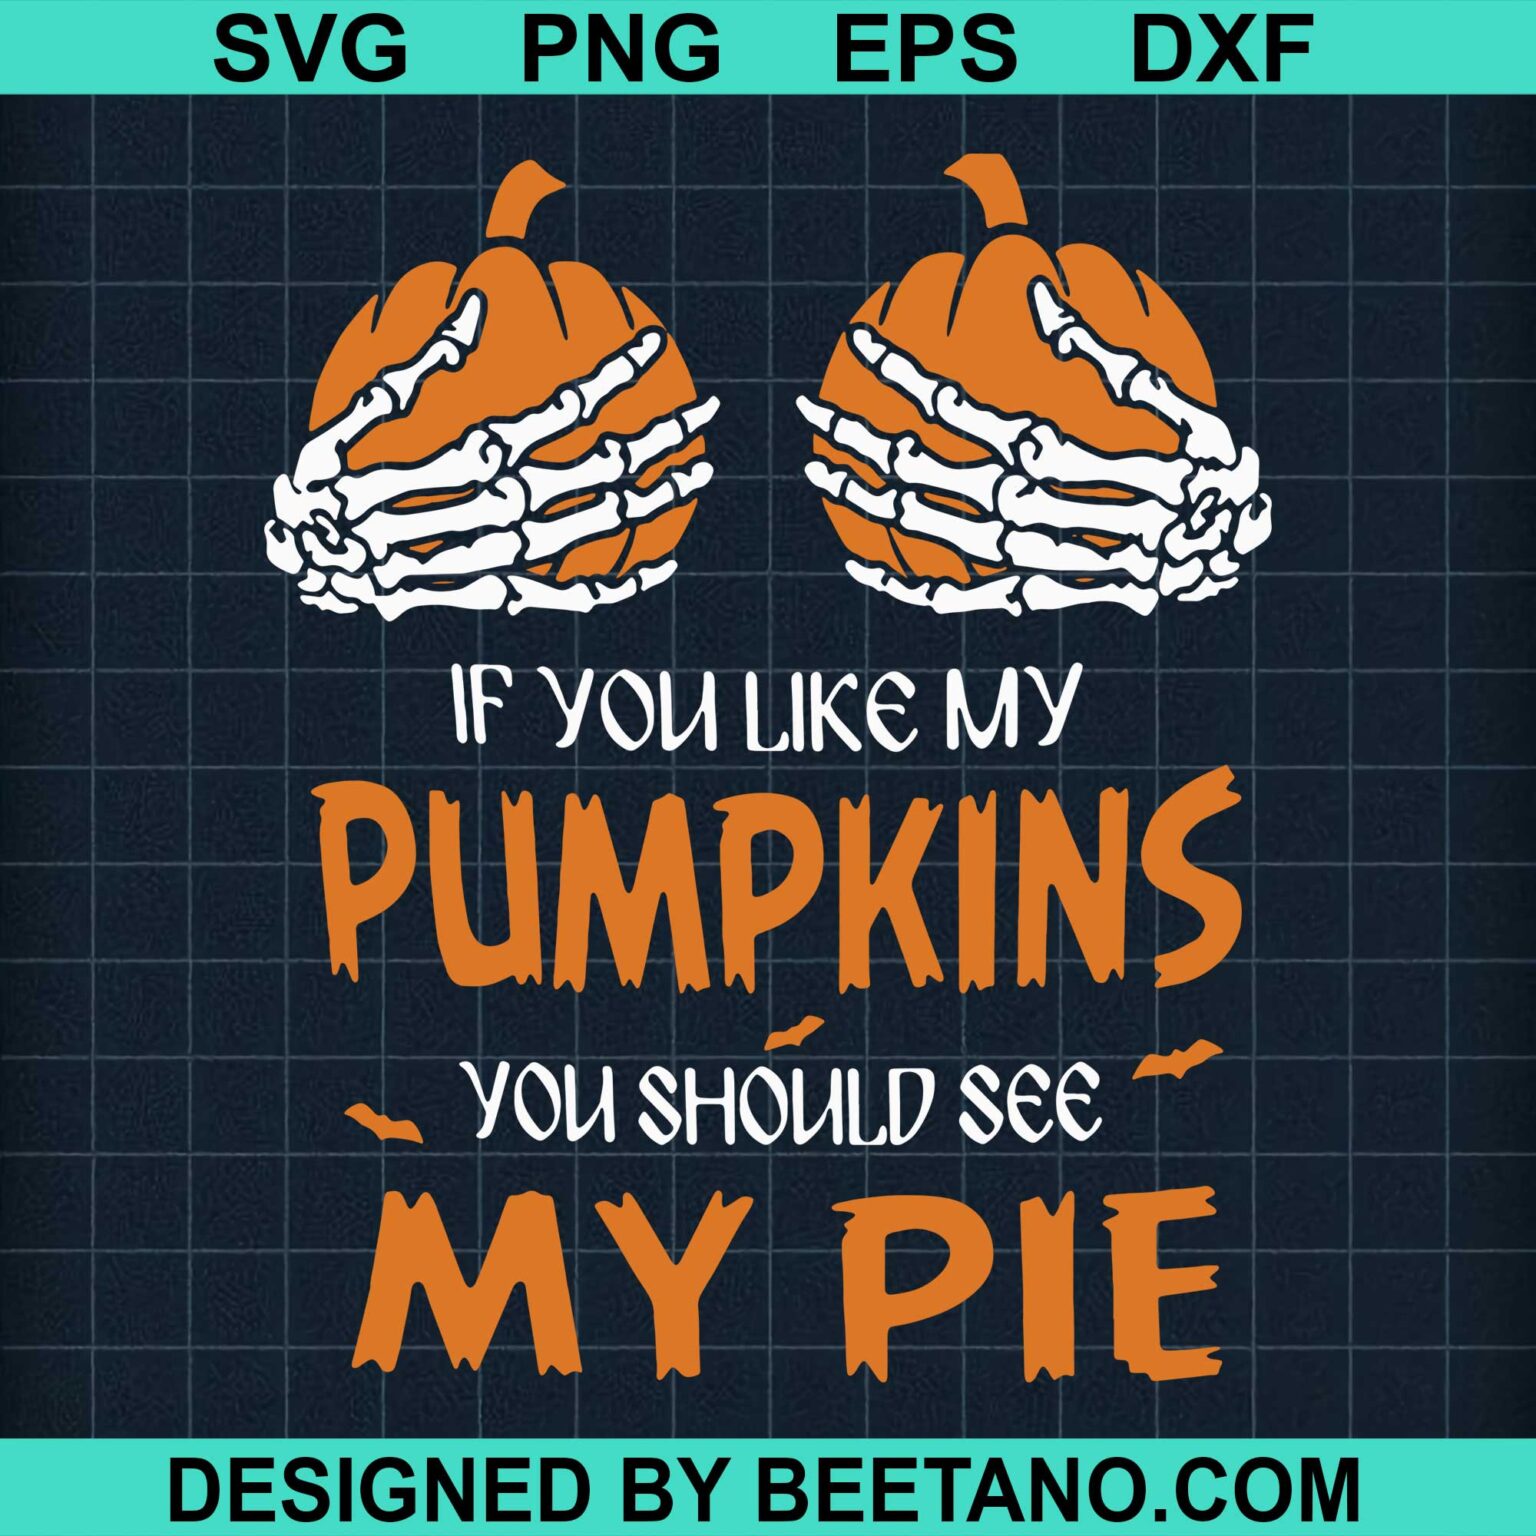 If You Like My Pumpkins You Should See My Pie SVG cut file for cricut ...